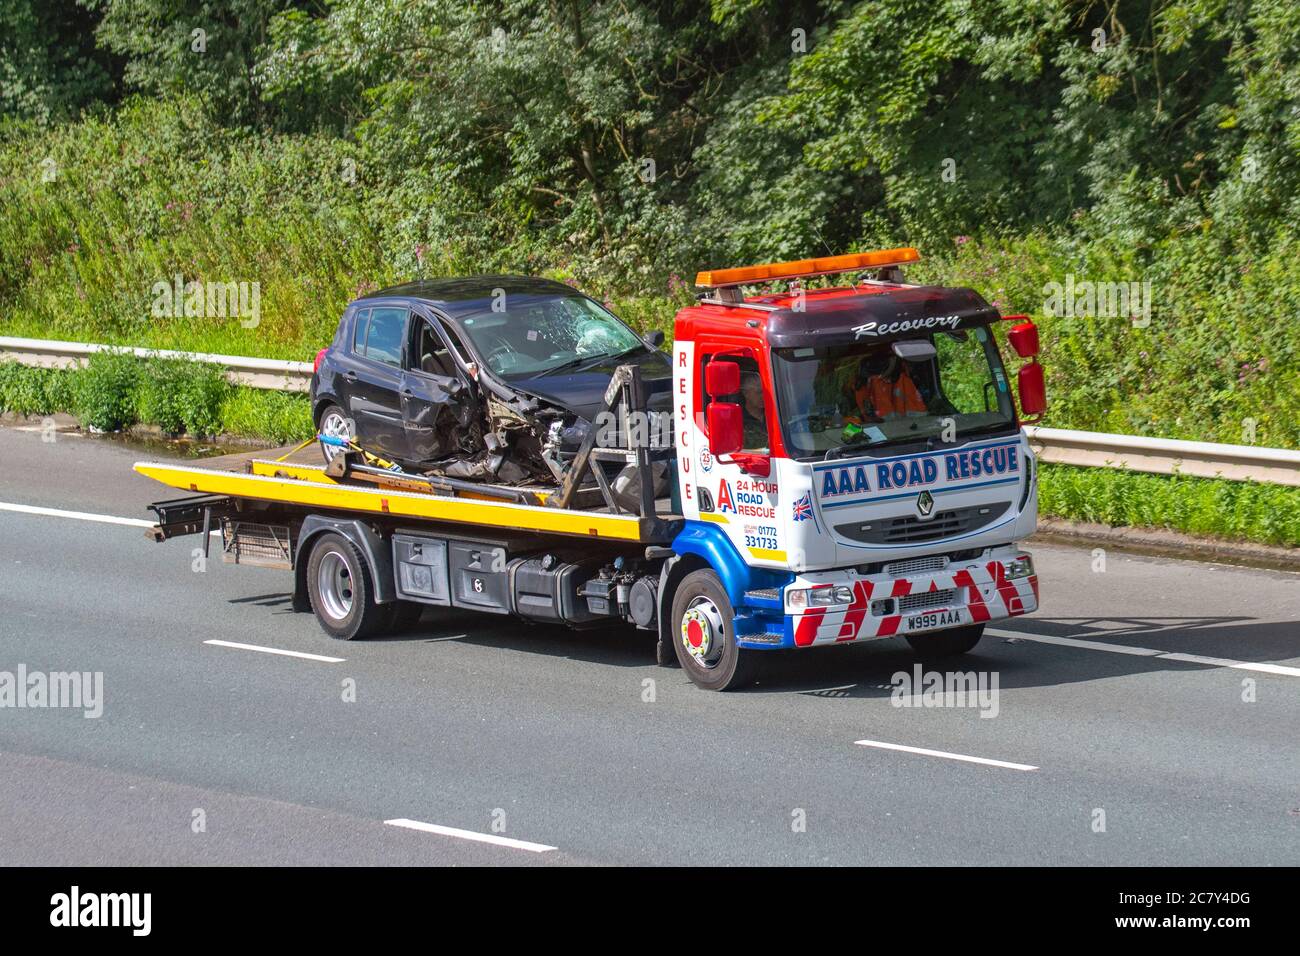 AAA Road Rescue (Leyland).  24 hr accident and breakdown recovery services. Renault Road Rescue,  24 hour roadside breakdown service. Haulage delivery trucks, lorry, transportation, truck, AUTO carrier, Renault  vehicle, European commercial transport, industry, M6 at Manchester, UK Stock Photo